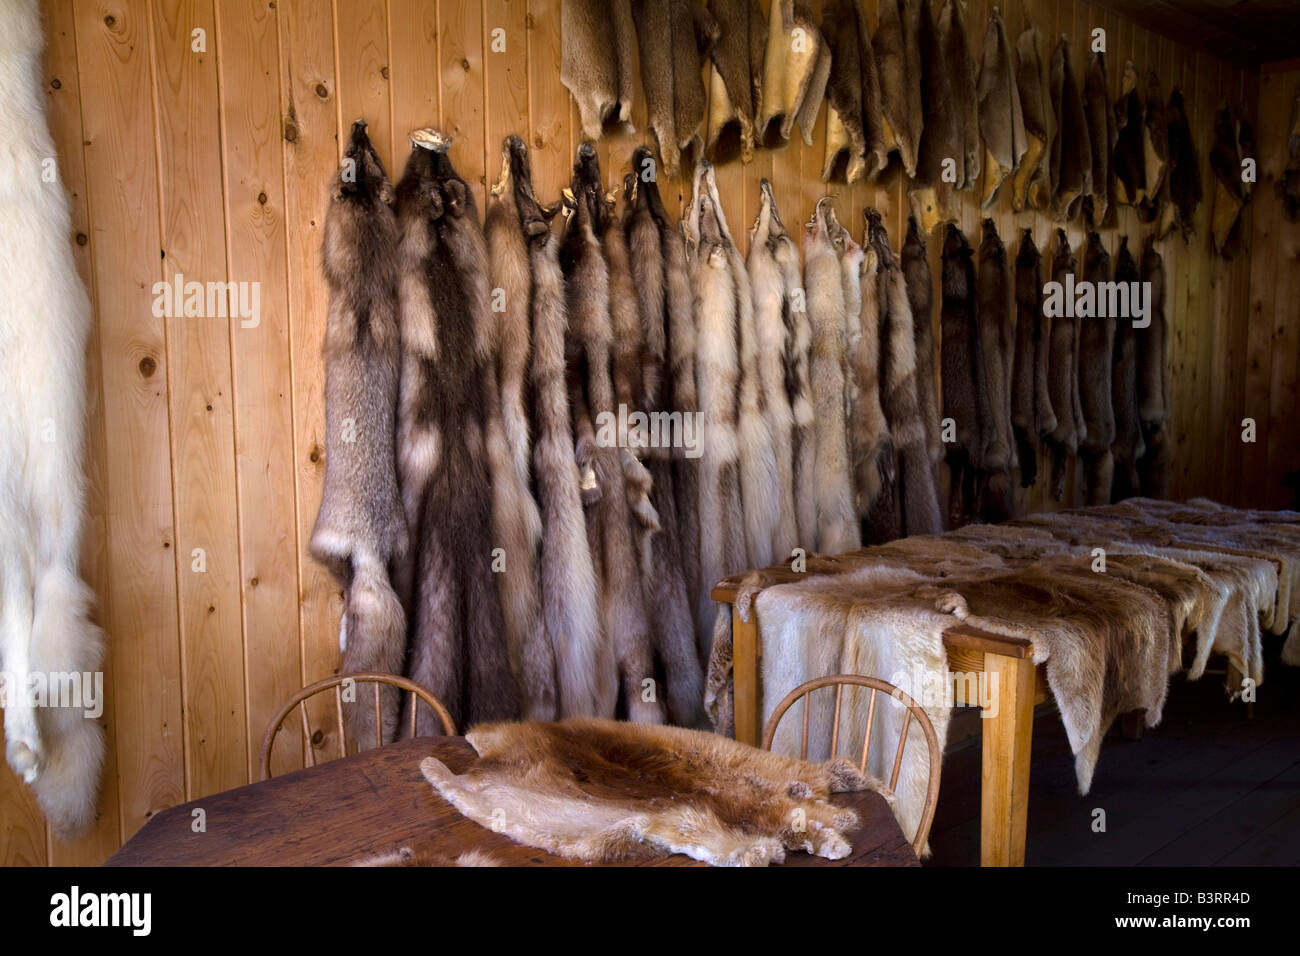 Furs pelts dry goods trapping supplies at trading post Fort Saint